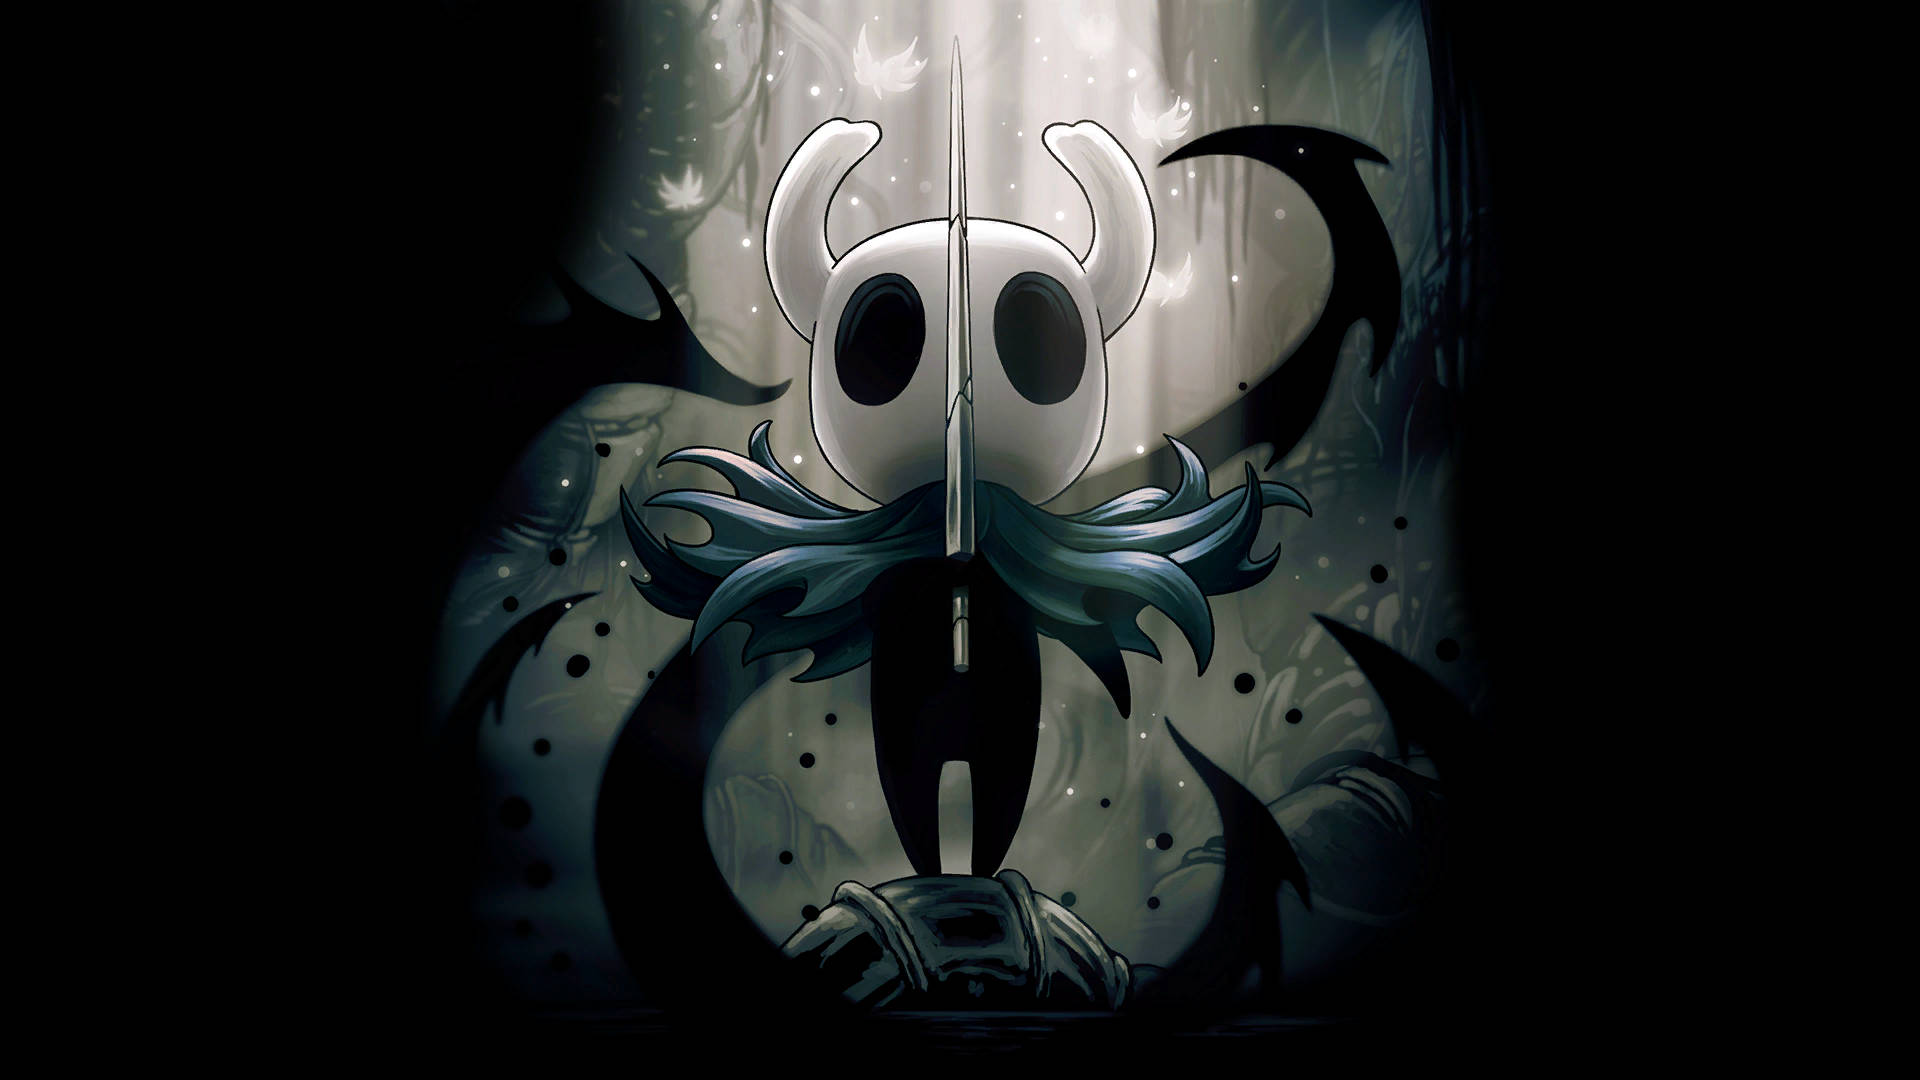 Journey through a mysterious world with Hollow Knight Wallpaper